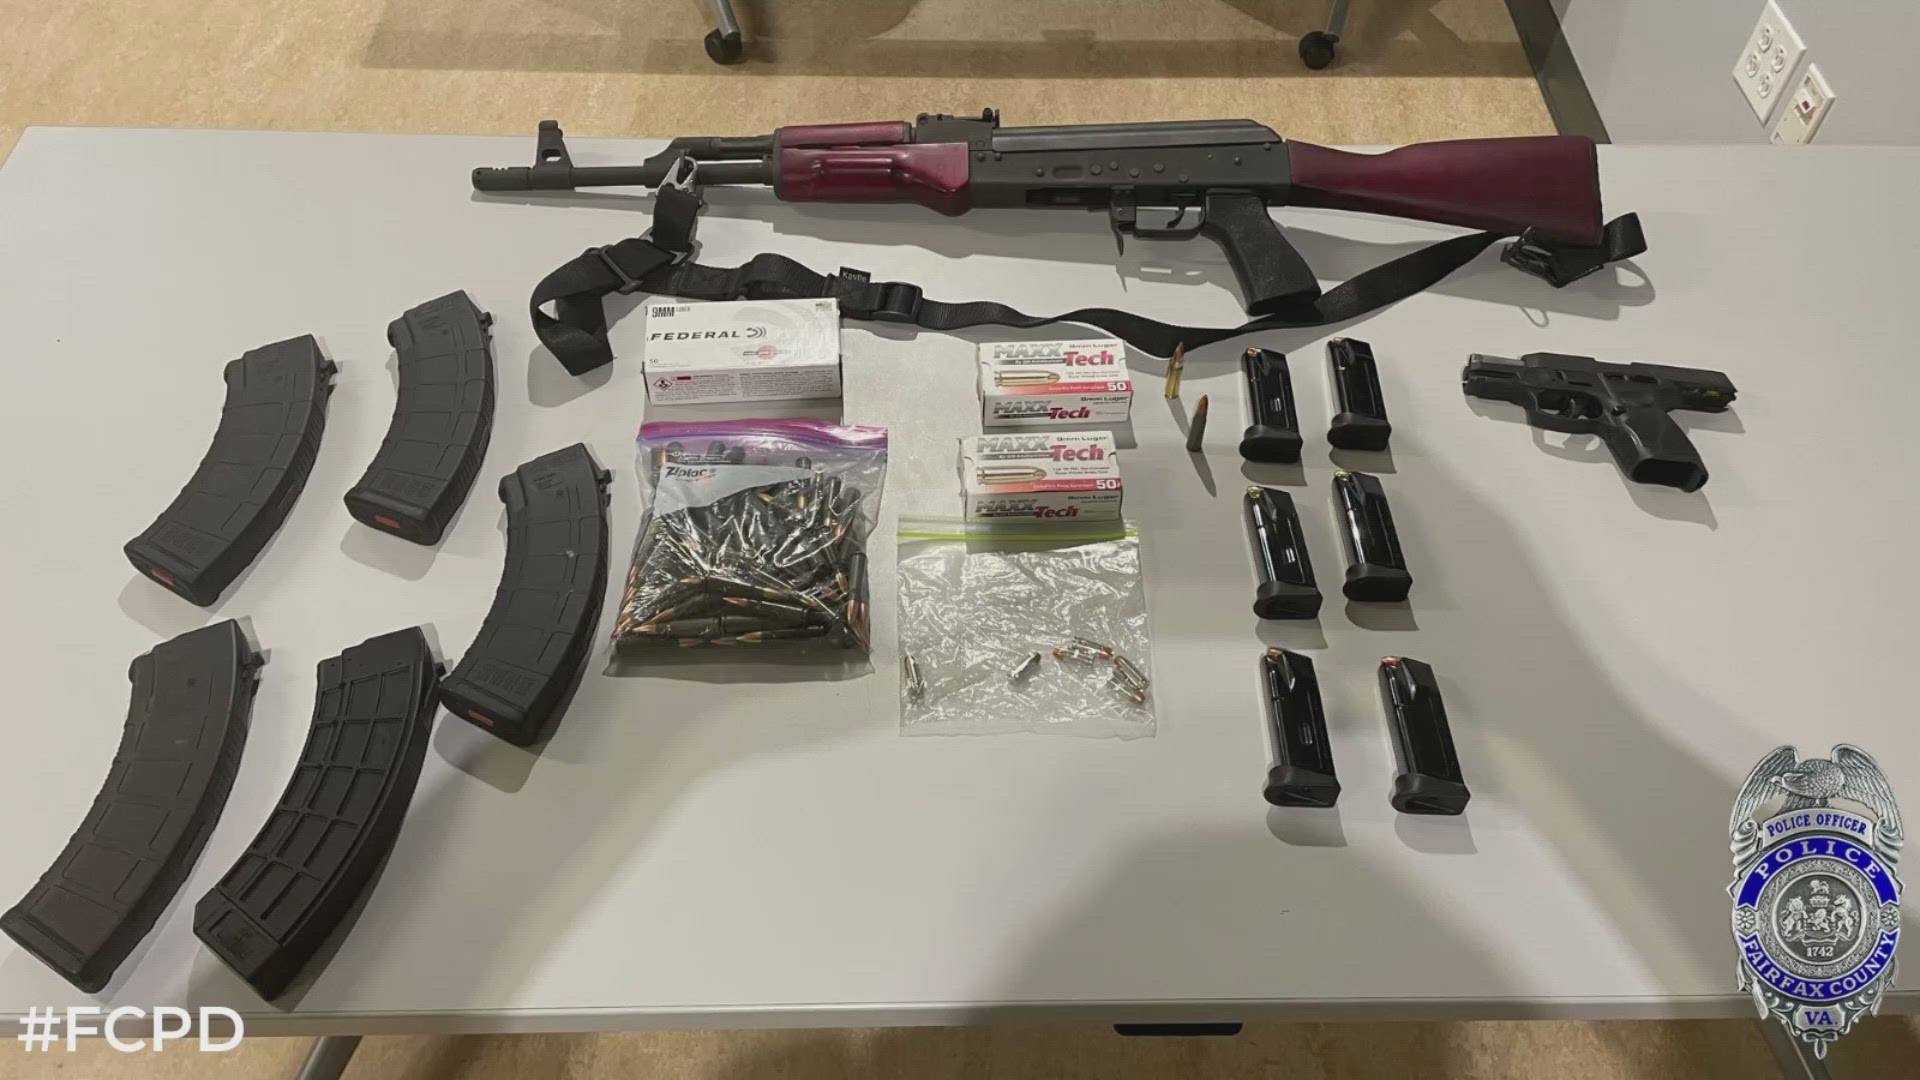 After trespassing on a preschool's campus in Fairfax County, a Florida man trying to get to CIA headquarters was charged and several weapons were confiscated.